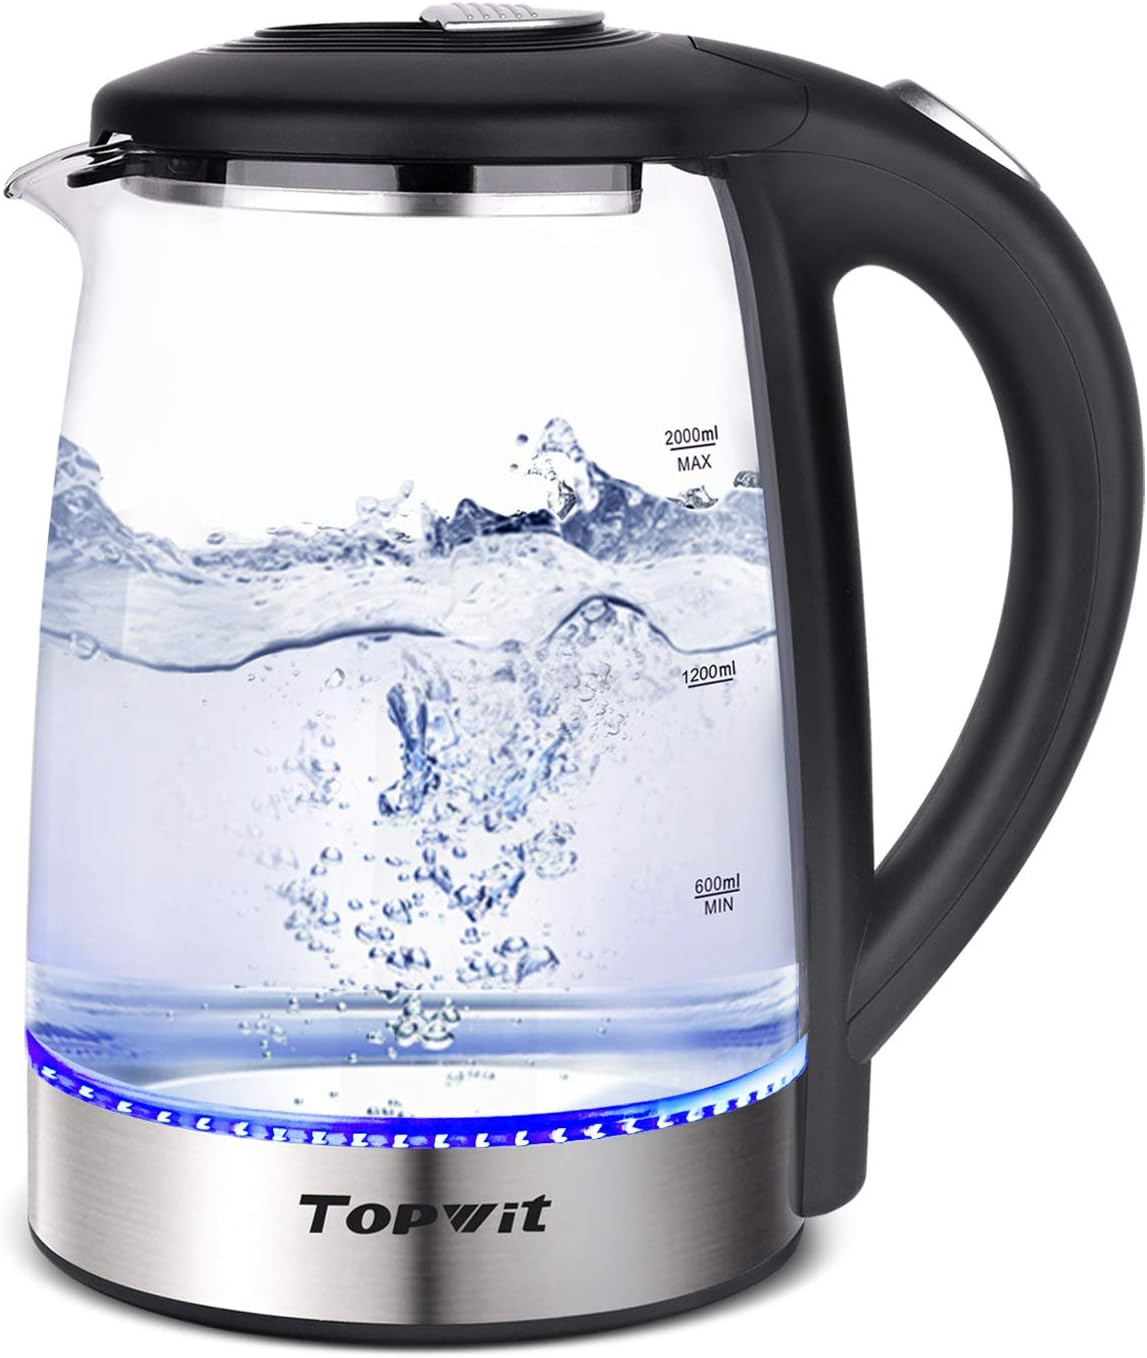 TOPWIT Electric Kettle Glass Hot Water Kettle, 2.0L Water Warmer, BPA-Free Stainless Steel Lid  Bottom, Tea Kettle with Fast Heating, Auto Shut-Off  Boil Dry Protection